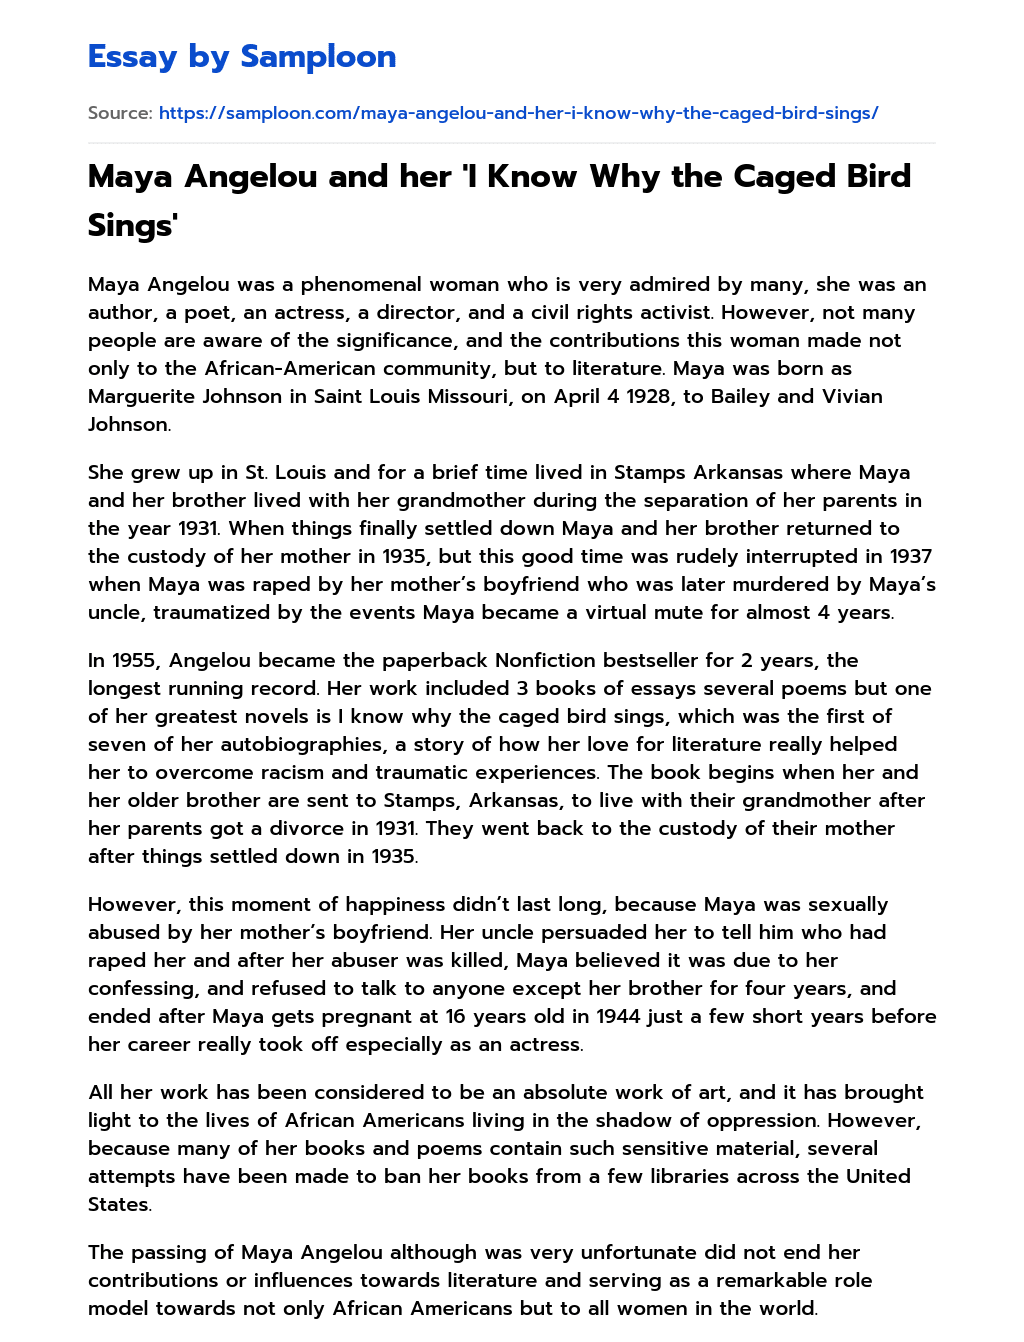 Maya Angelou and her ‘I Know Why the Caged Bird Sings’ essay